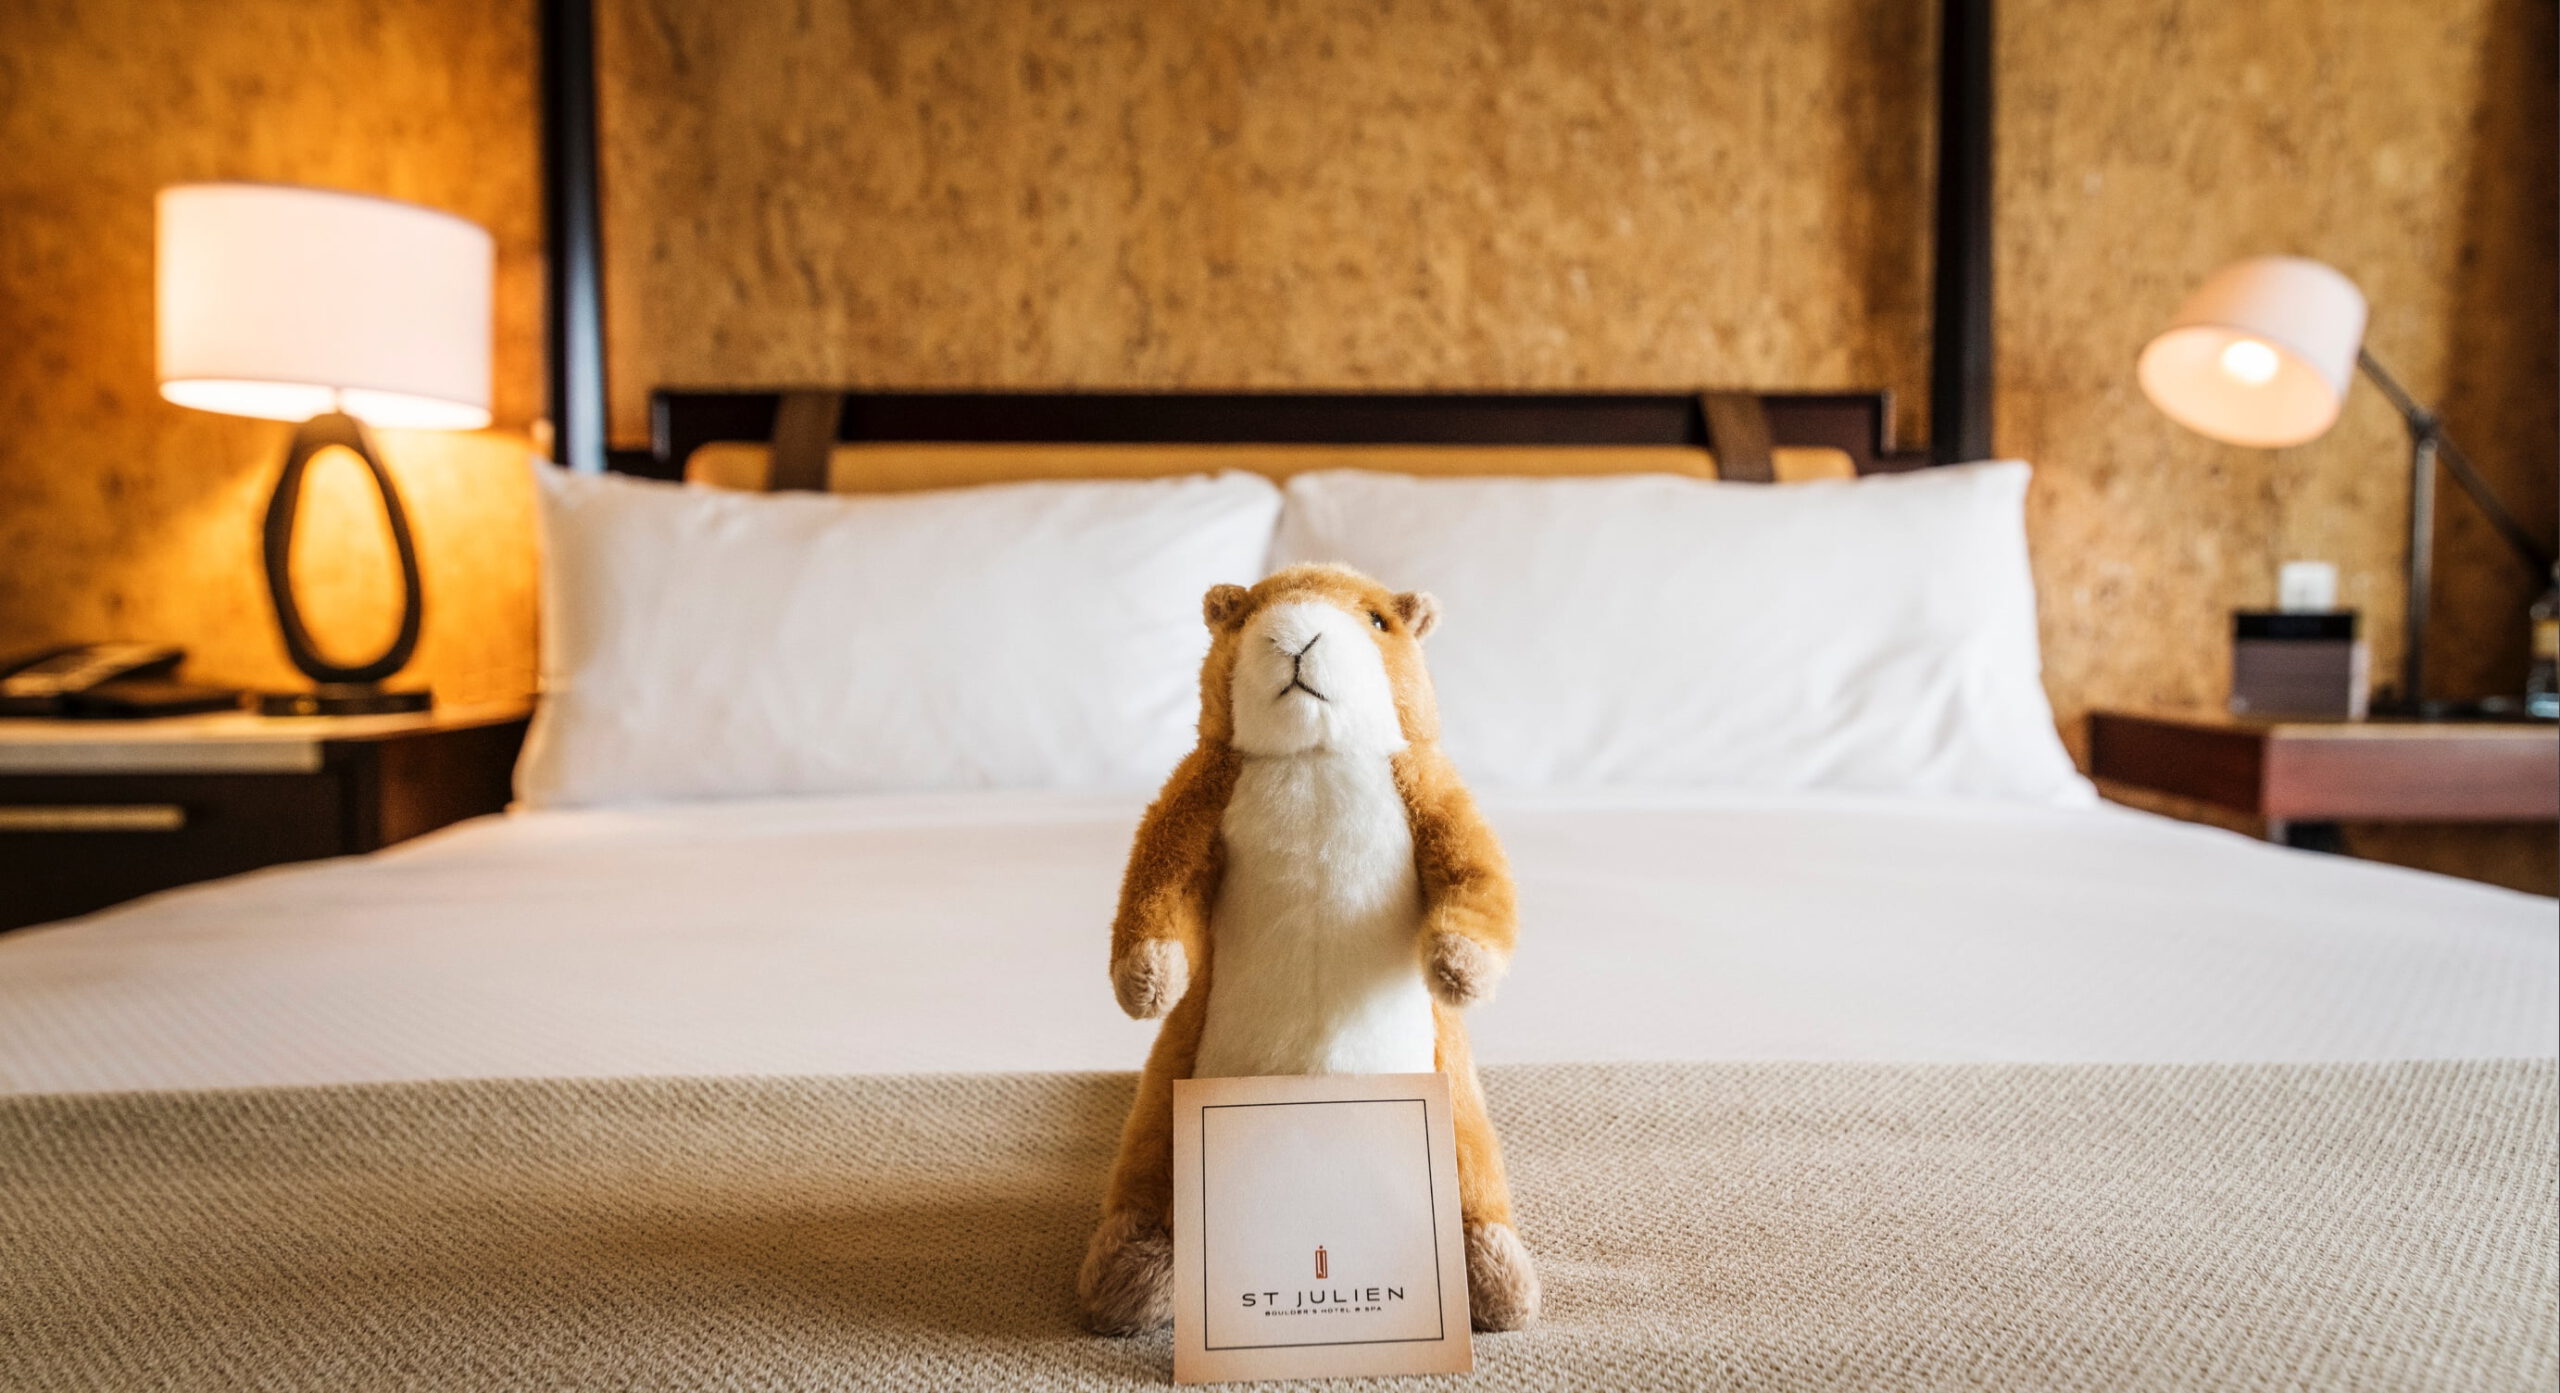 Cute stuffed animal holding a welcome card on a hotel bed